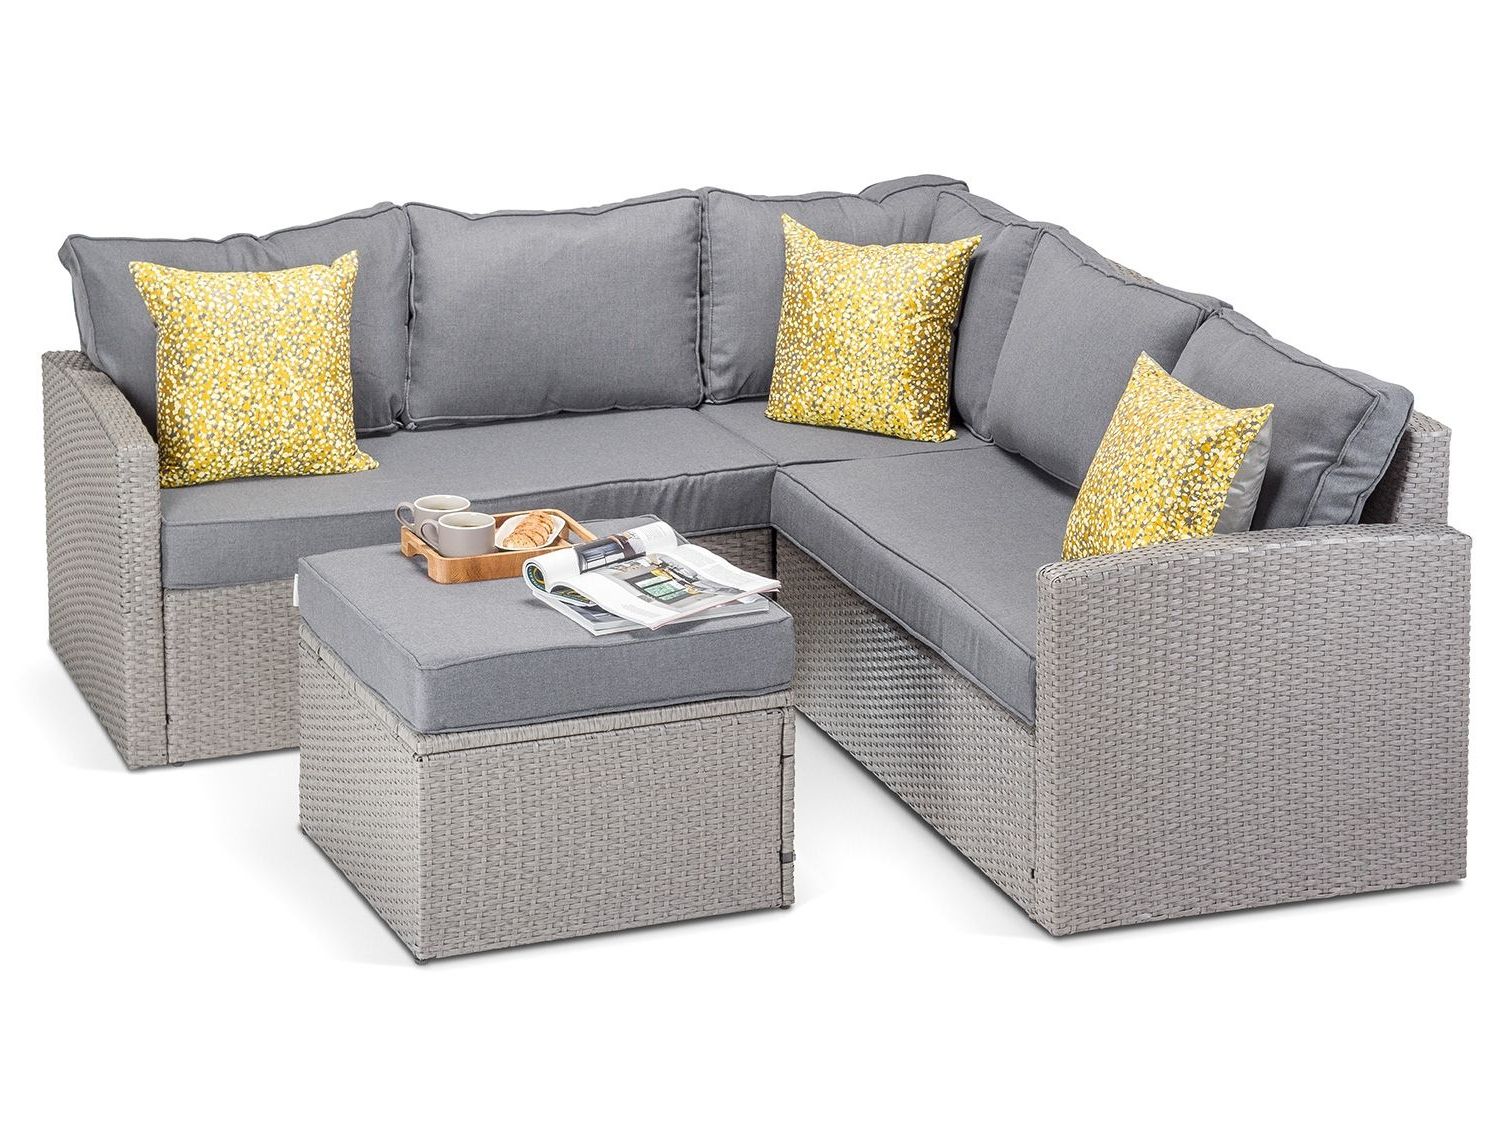 Gray Outdoor Table And Loveseat Sets Inside Current Rattan Verona Grey Corner Sofa With Dining Table (View 12 of 15)